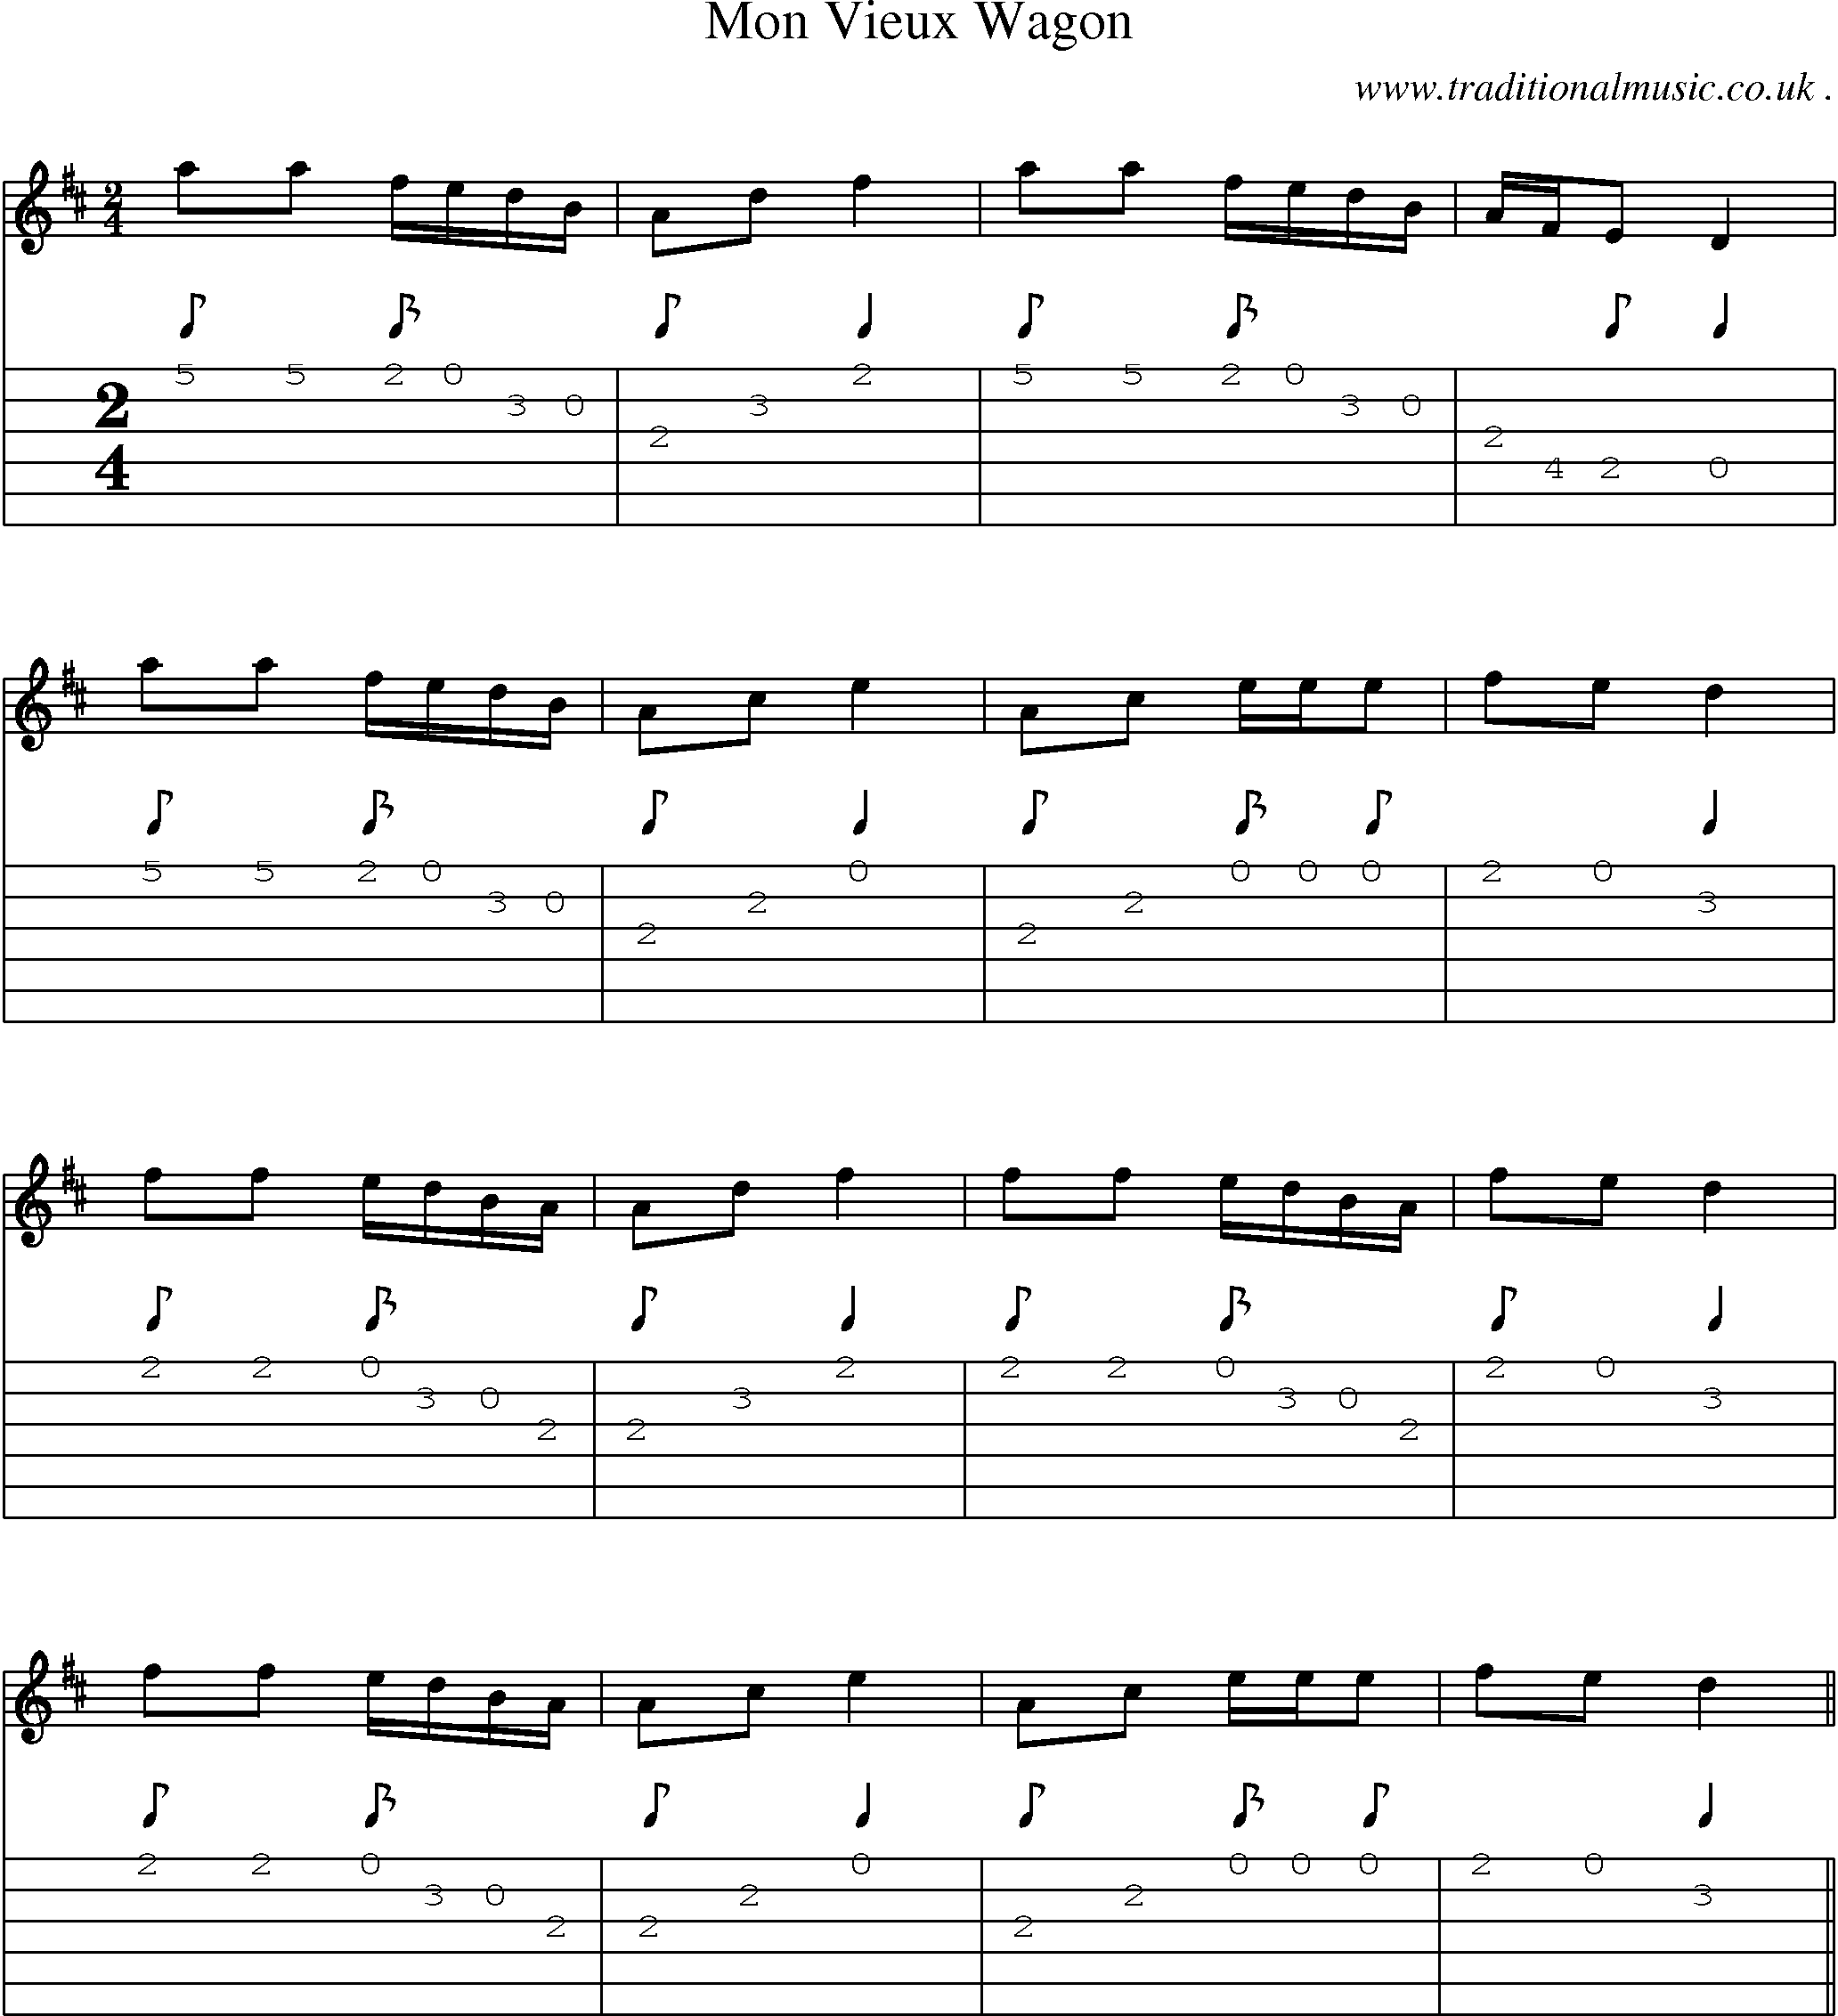 Sheet-Music and Guitar Tabs for Mon Vieux Wagon